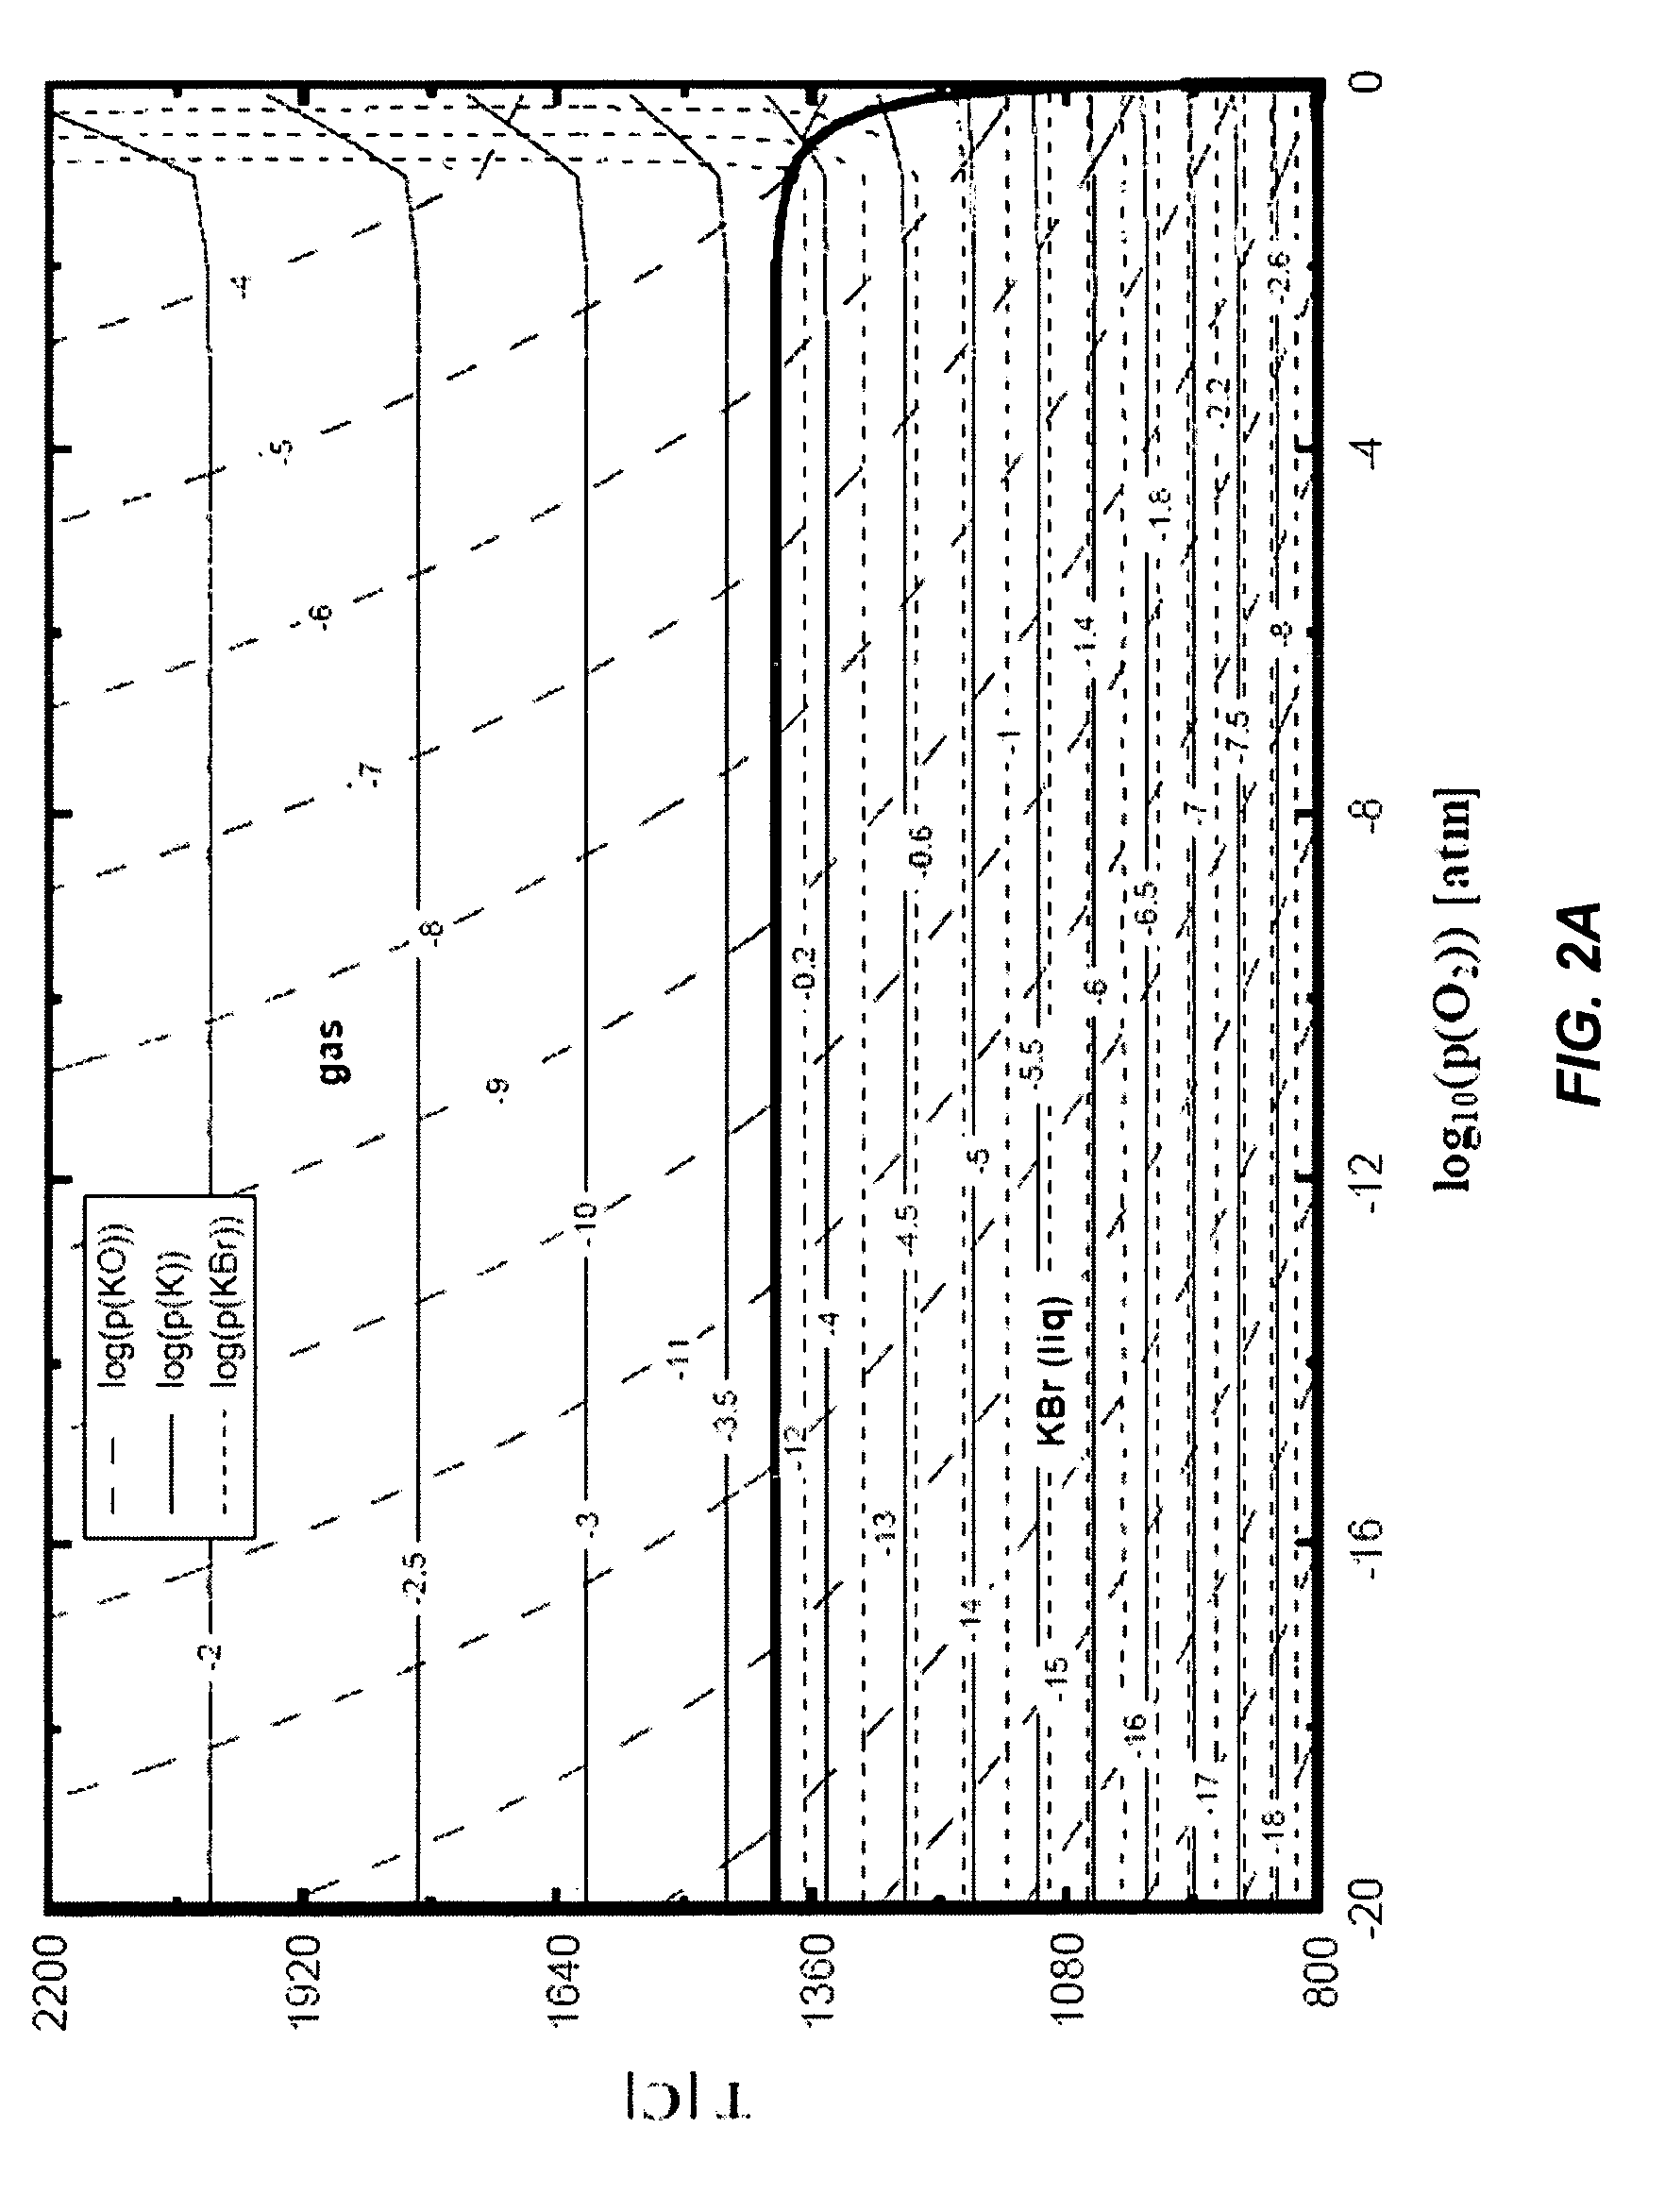 Method of doping silica glass with an alkali metal, and optical fiber precursor formed therefrom